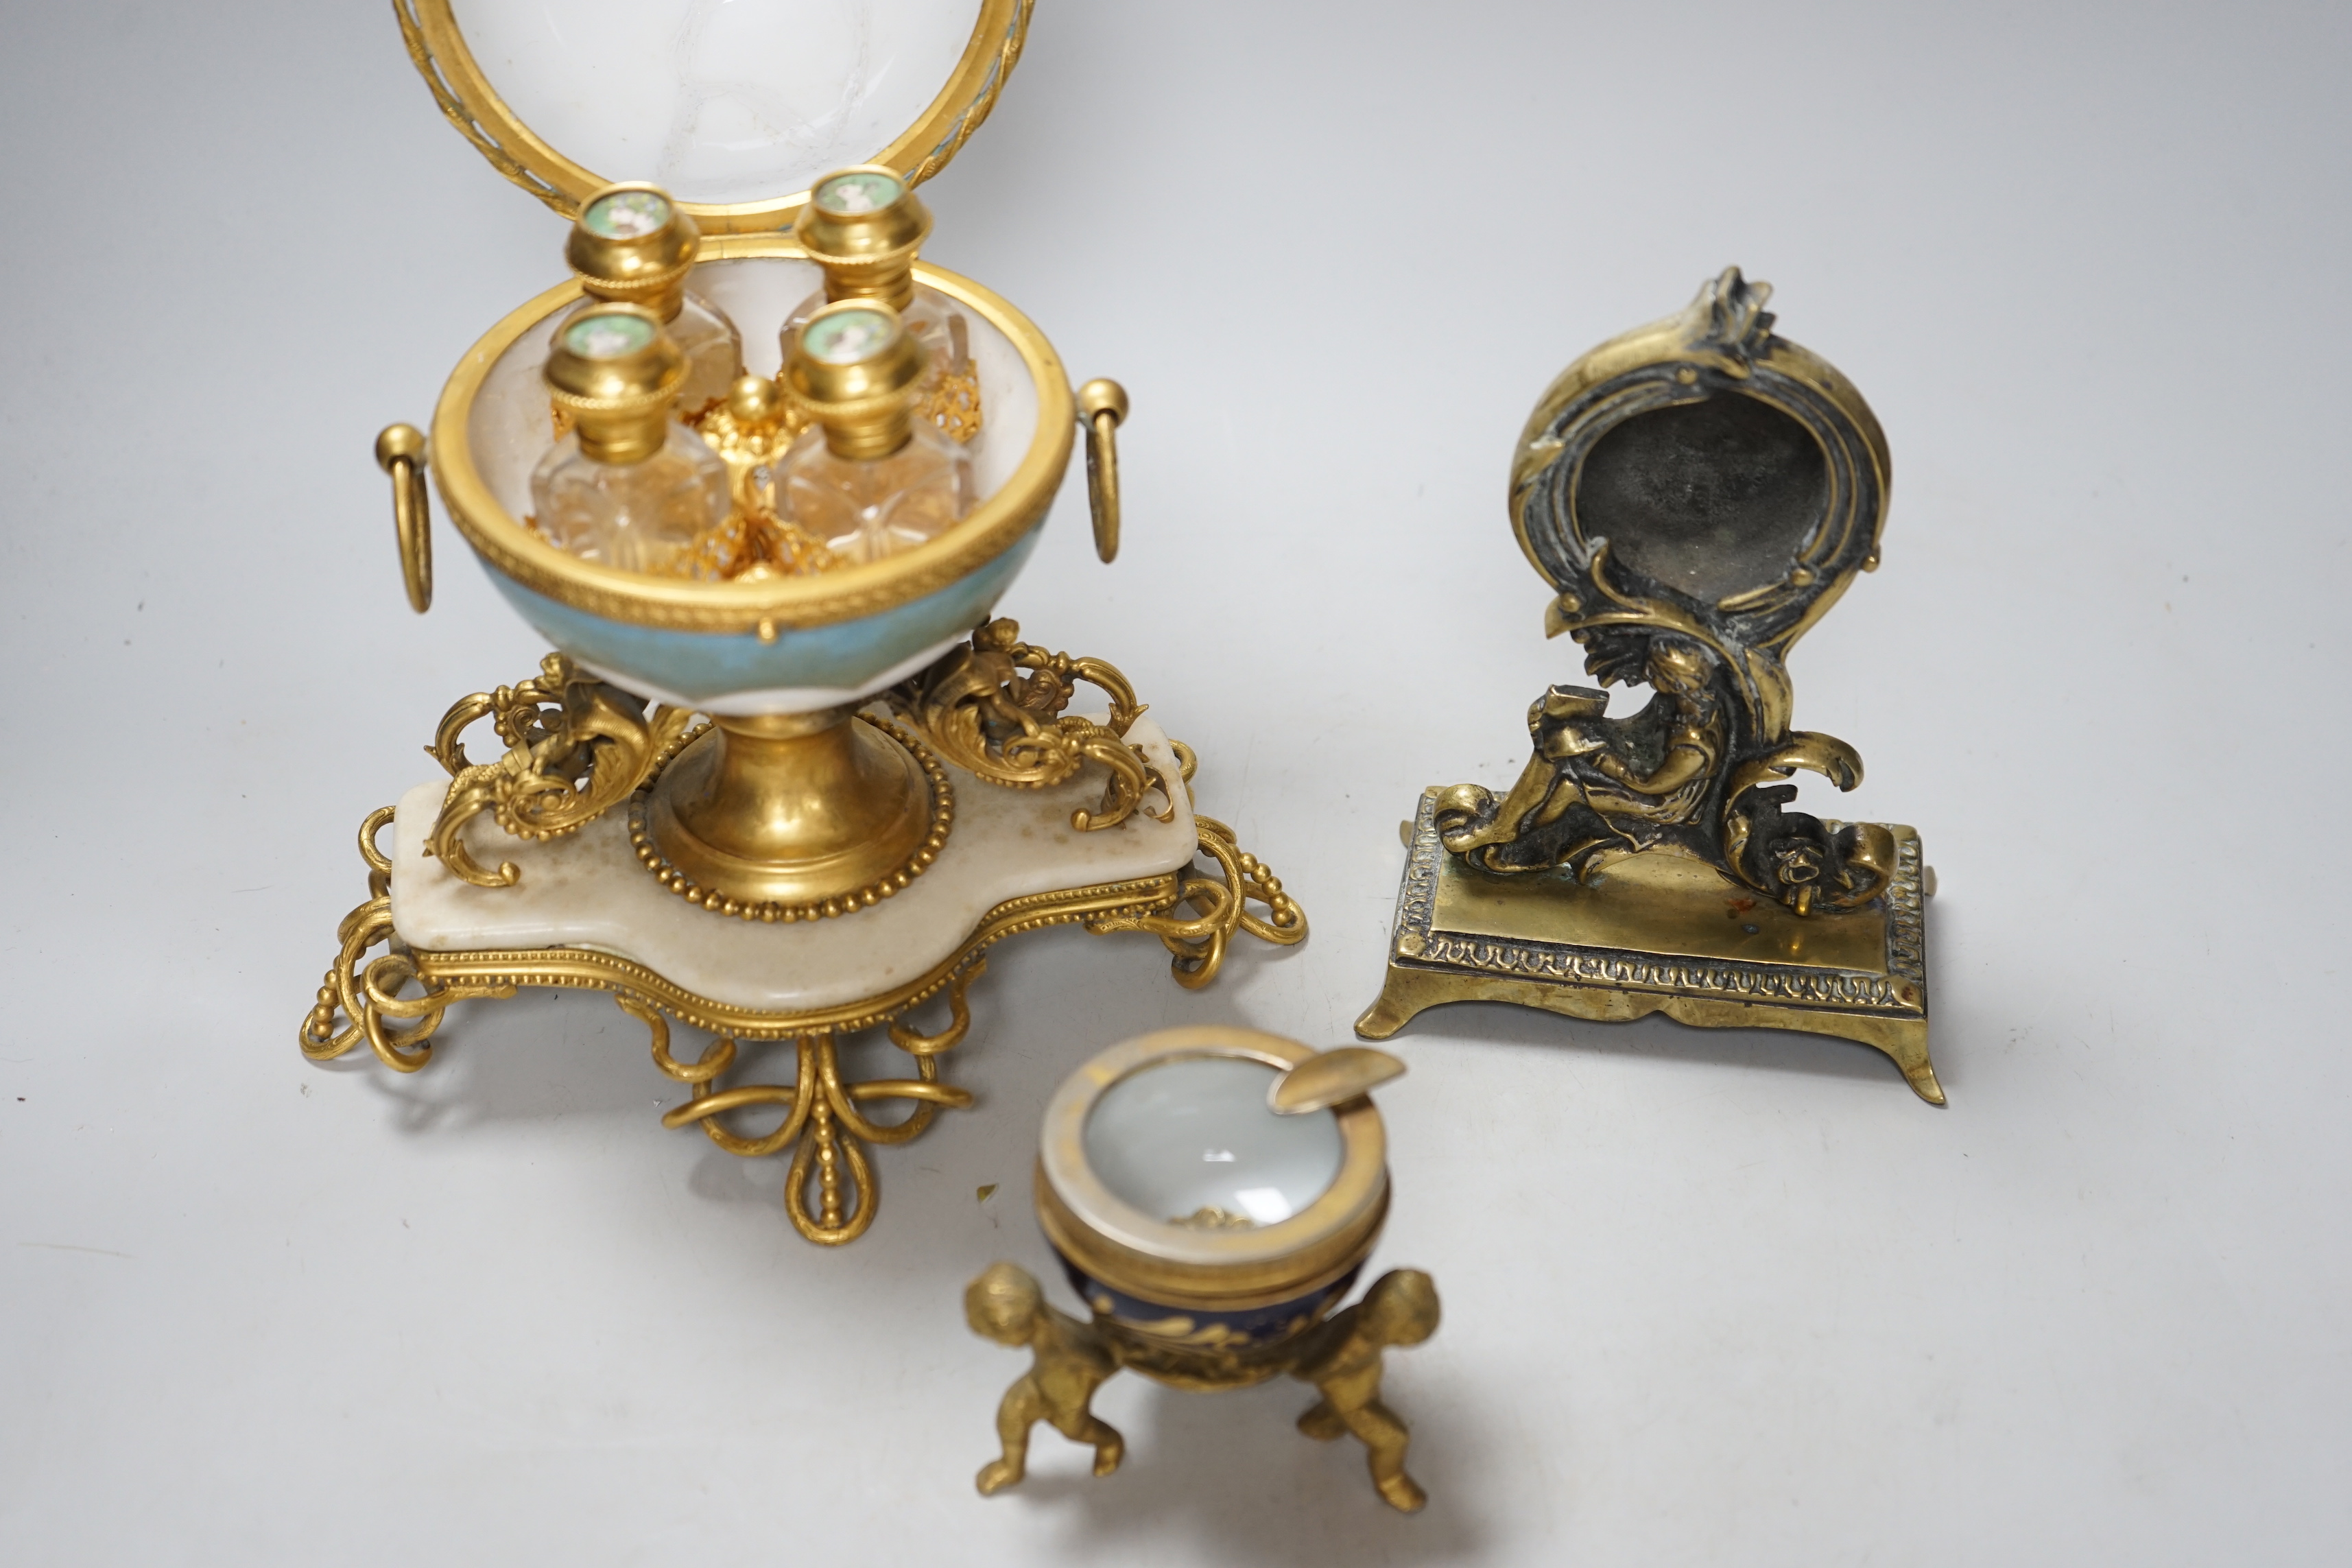 A 19th century French globular scent bottle casket together with a similar ash tray and a watch - Image 3 of 5